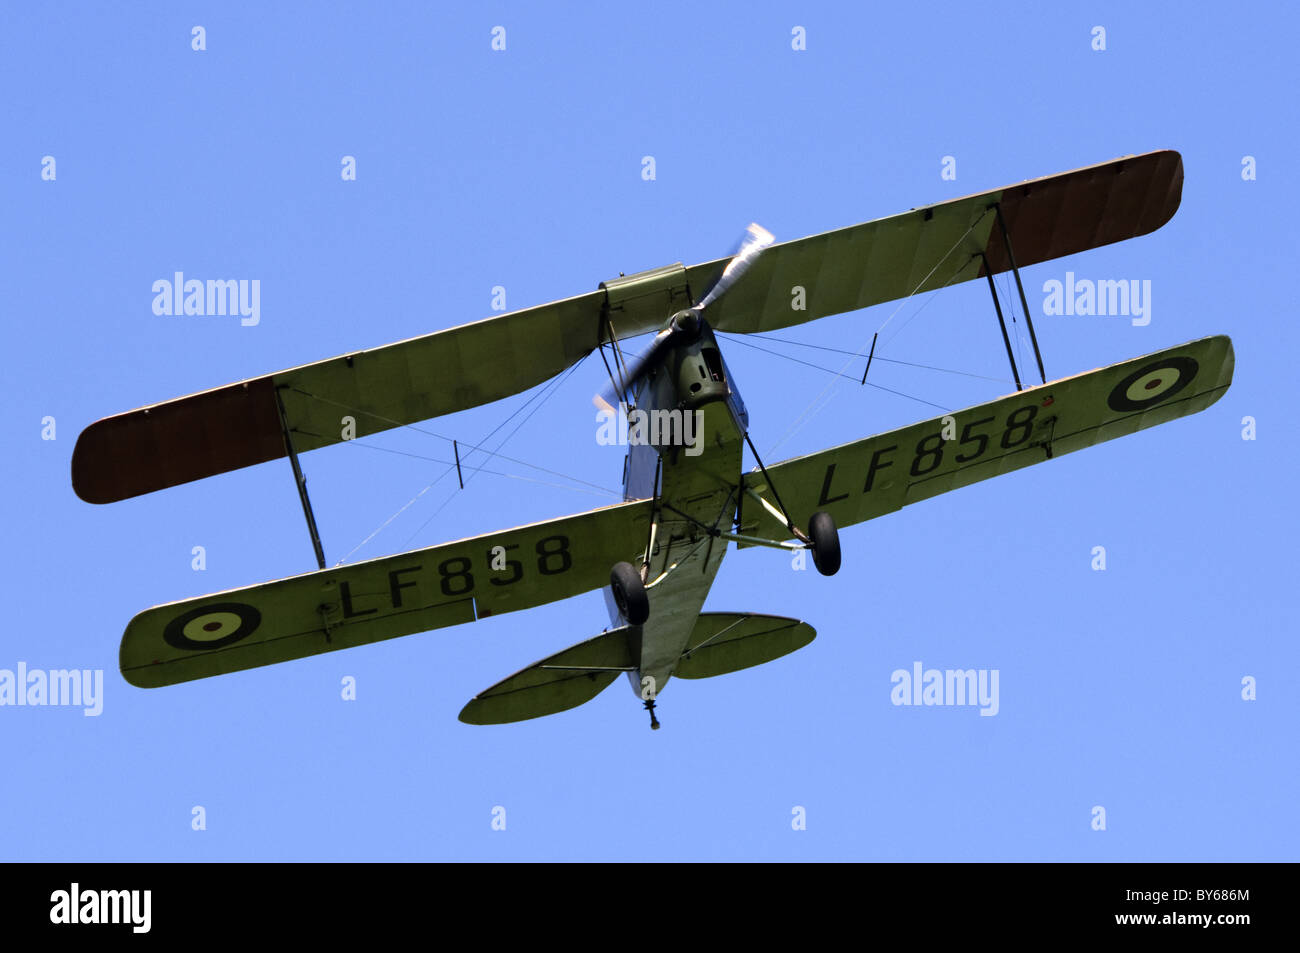 De Havilland DH-82B Queen Bee (Originally developed as a radio-controlled version of the DH-82A Tiger Moth for target practice) Stock Photo